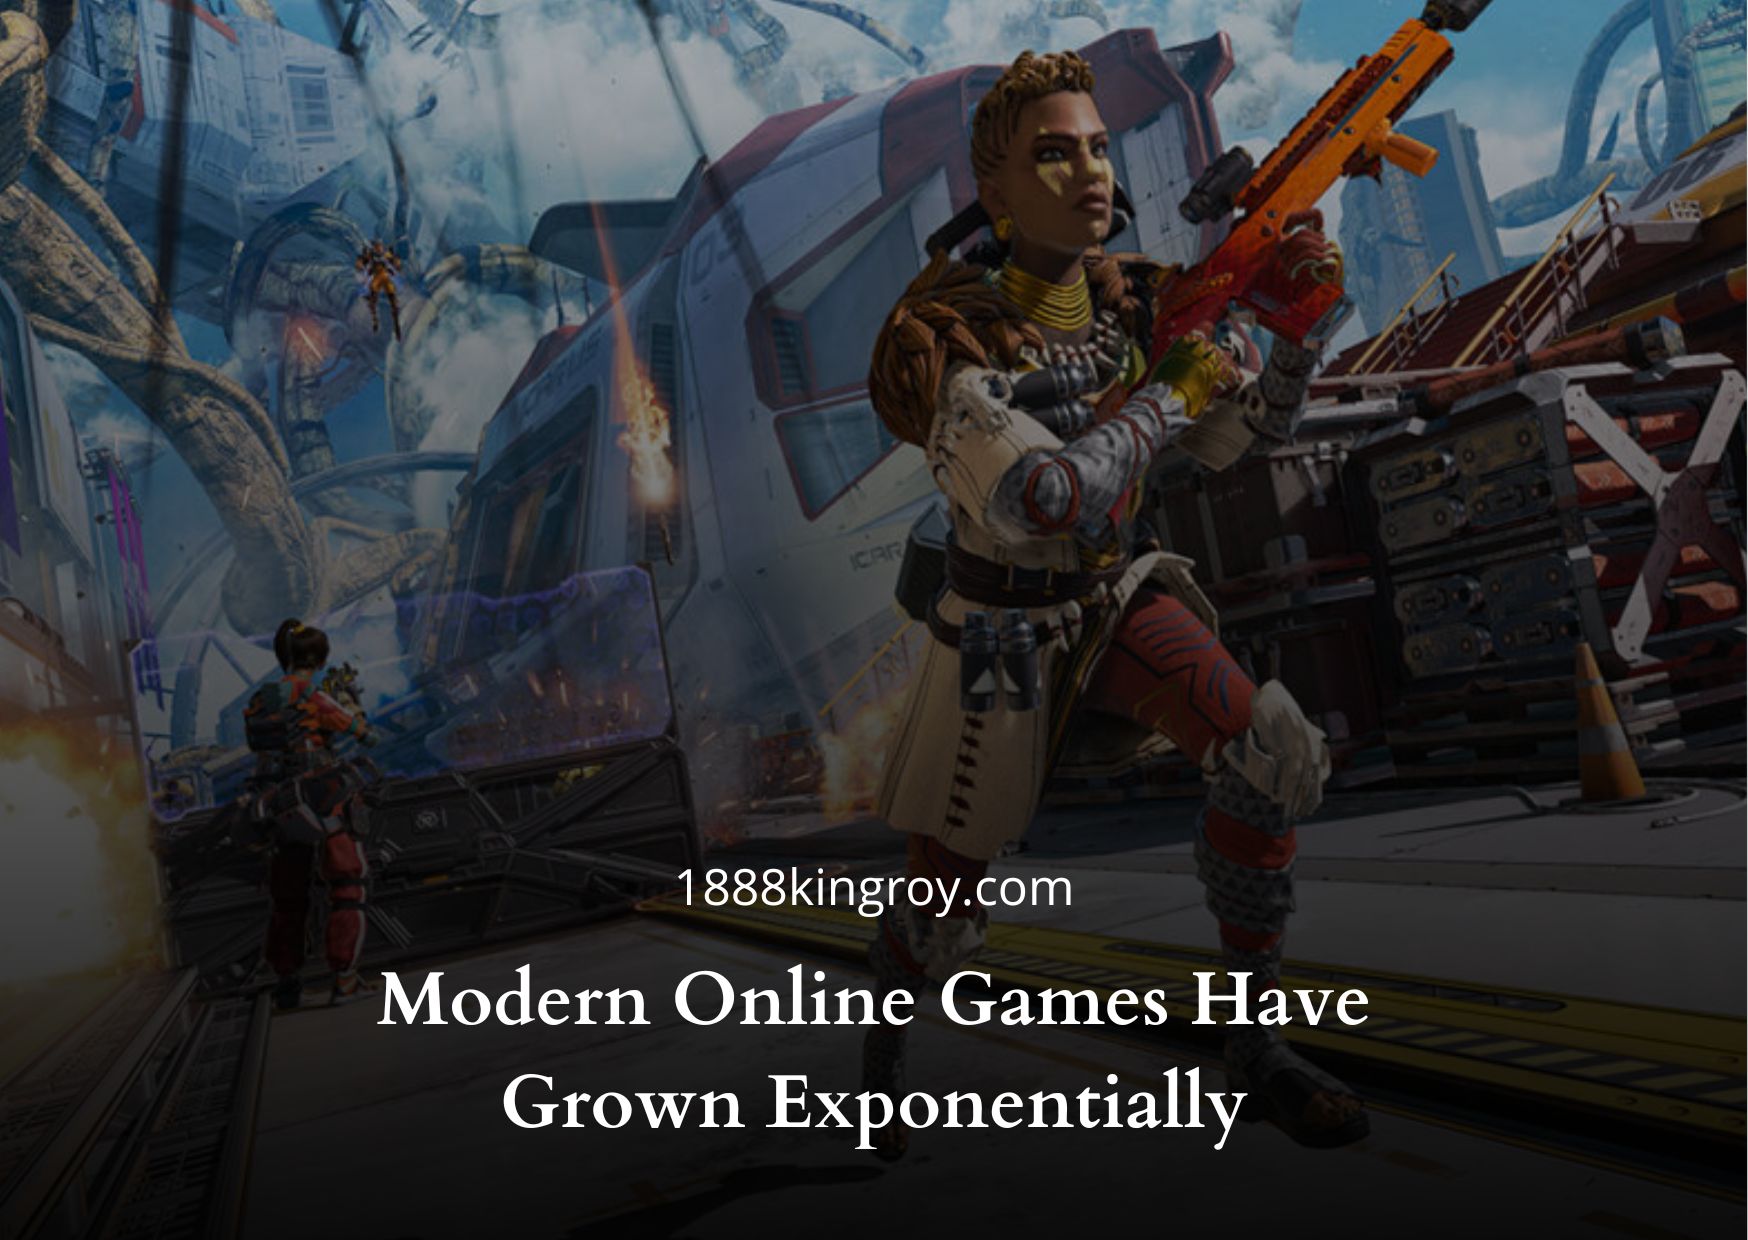 Modern Online Games Have Grown Exponentially